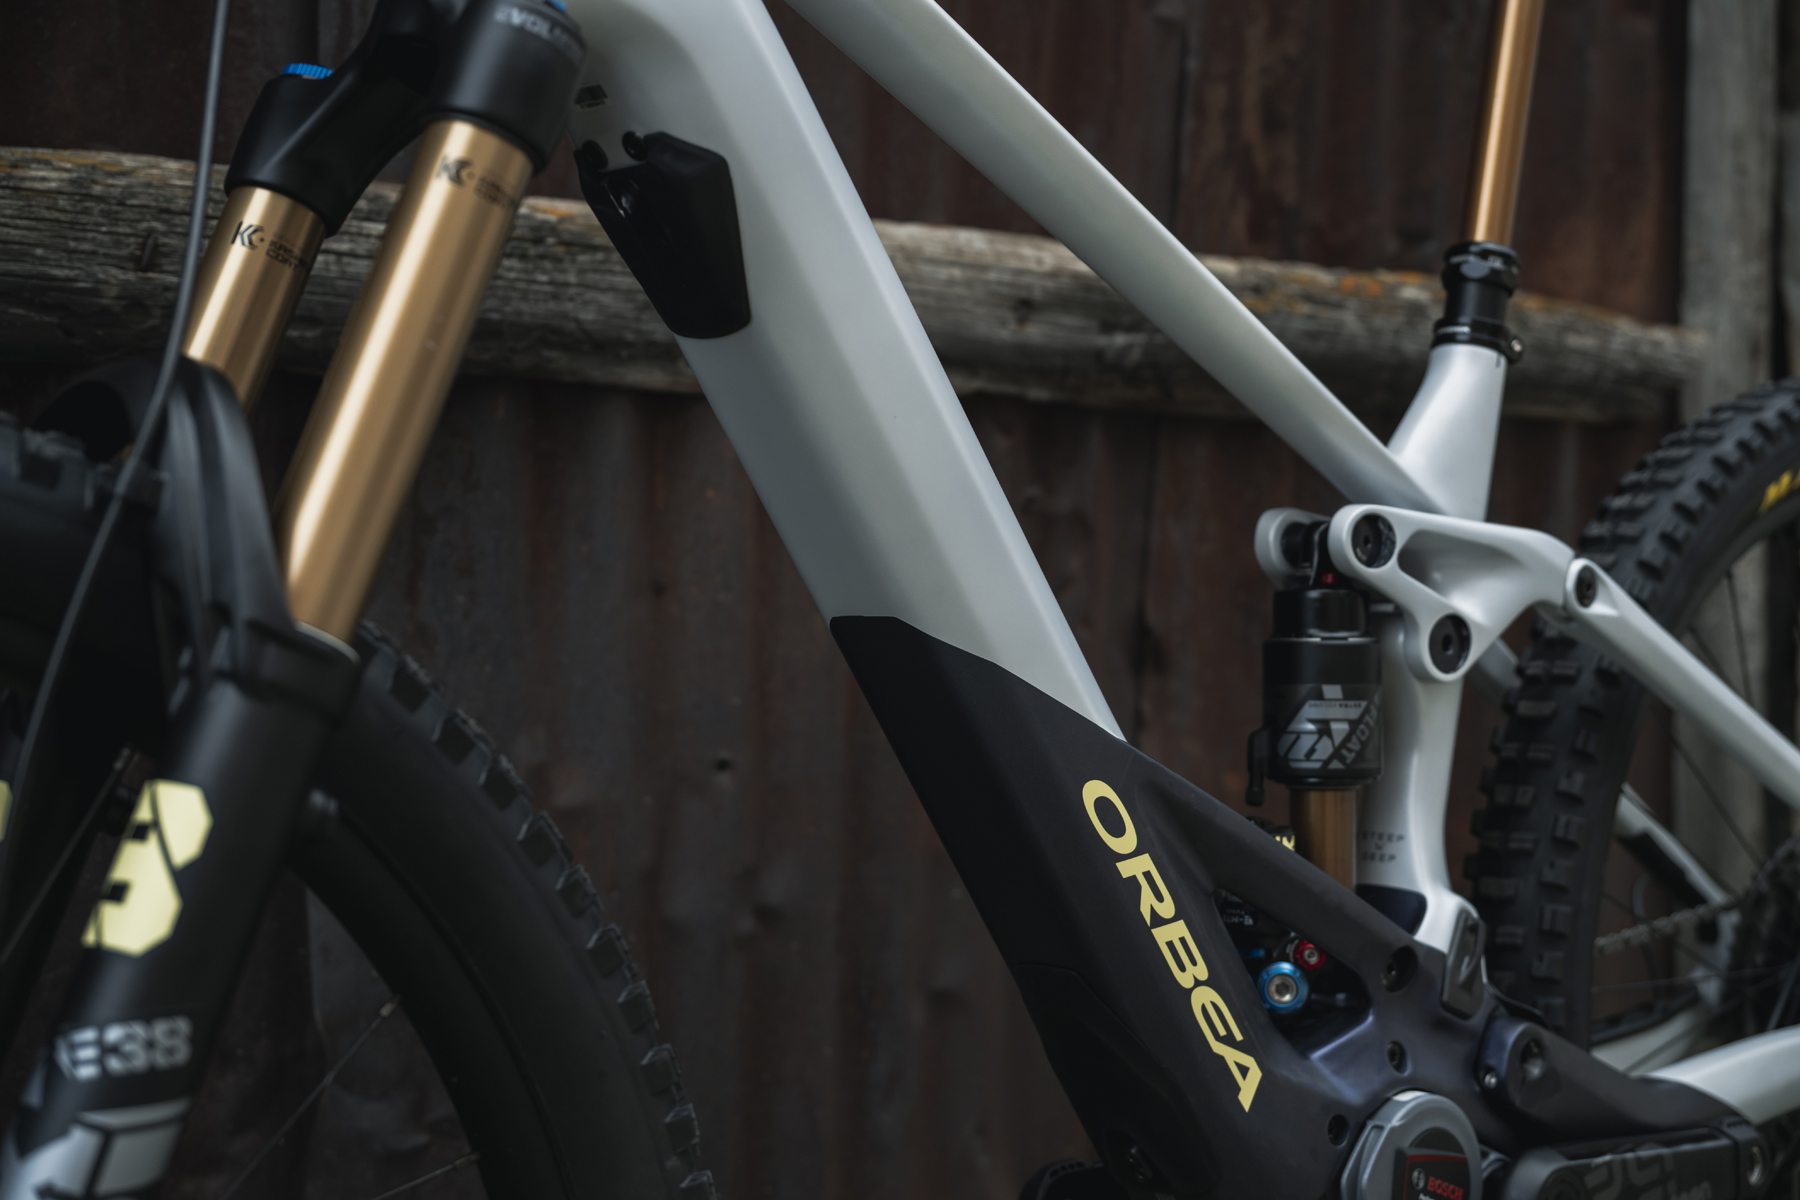 David Golay reviews the 2023 Orbea Wild for Blister